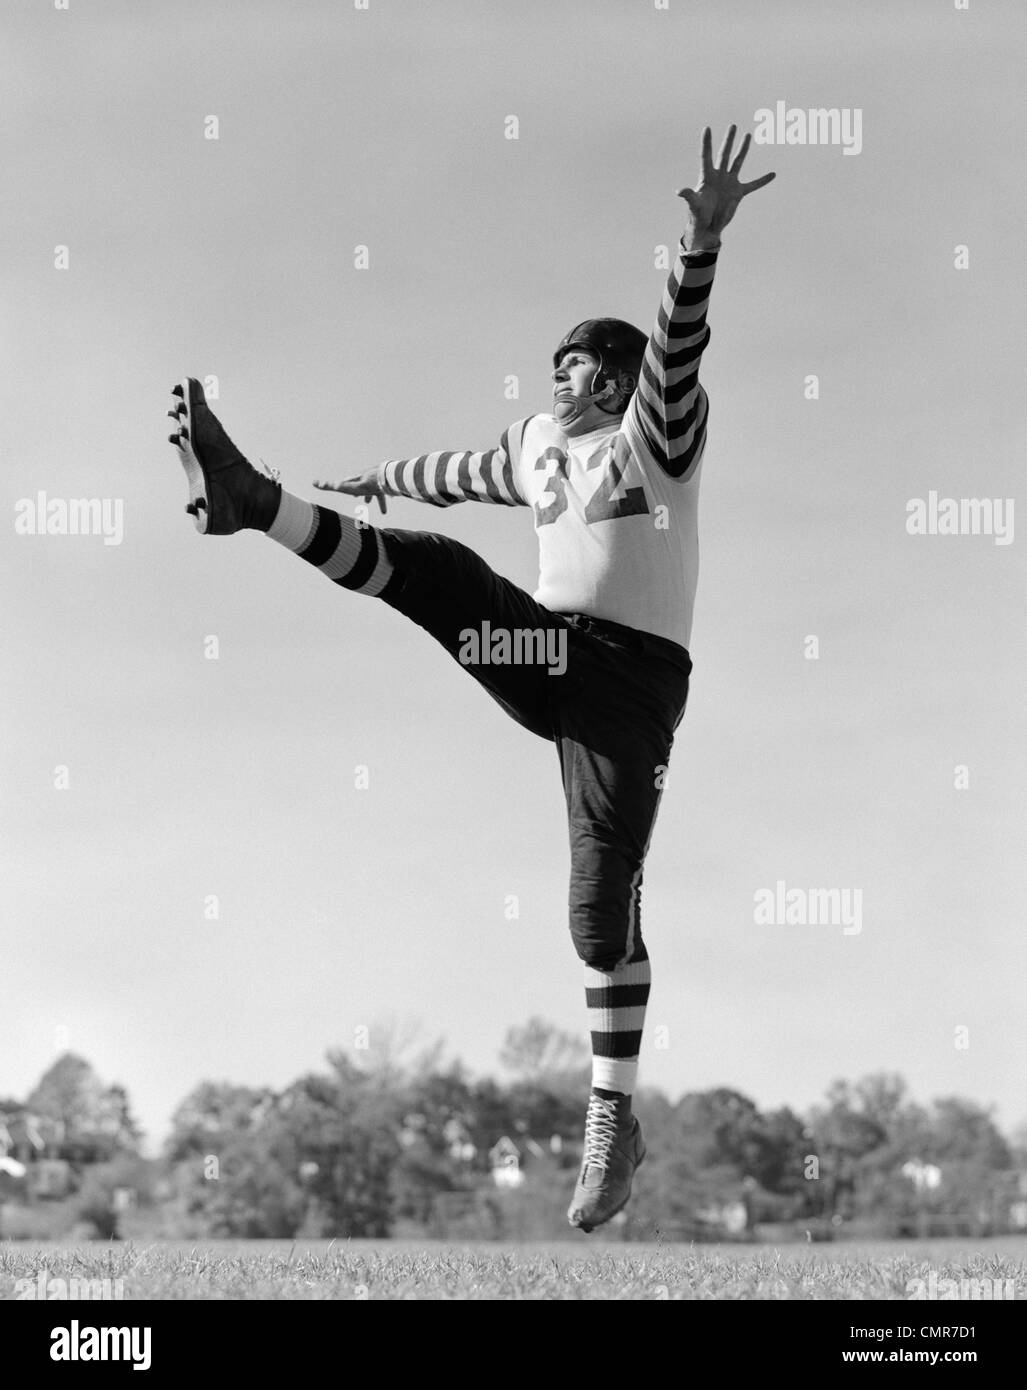 1930s FOOTBALL KICKER IN UNIFORM WITH STRIPED SLEEVES WITH LEG IN AIR & OTHER FOOT OFF OF GROUND Stock Photo